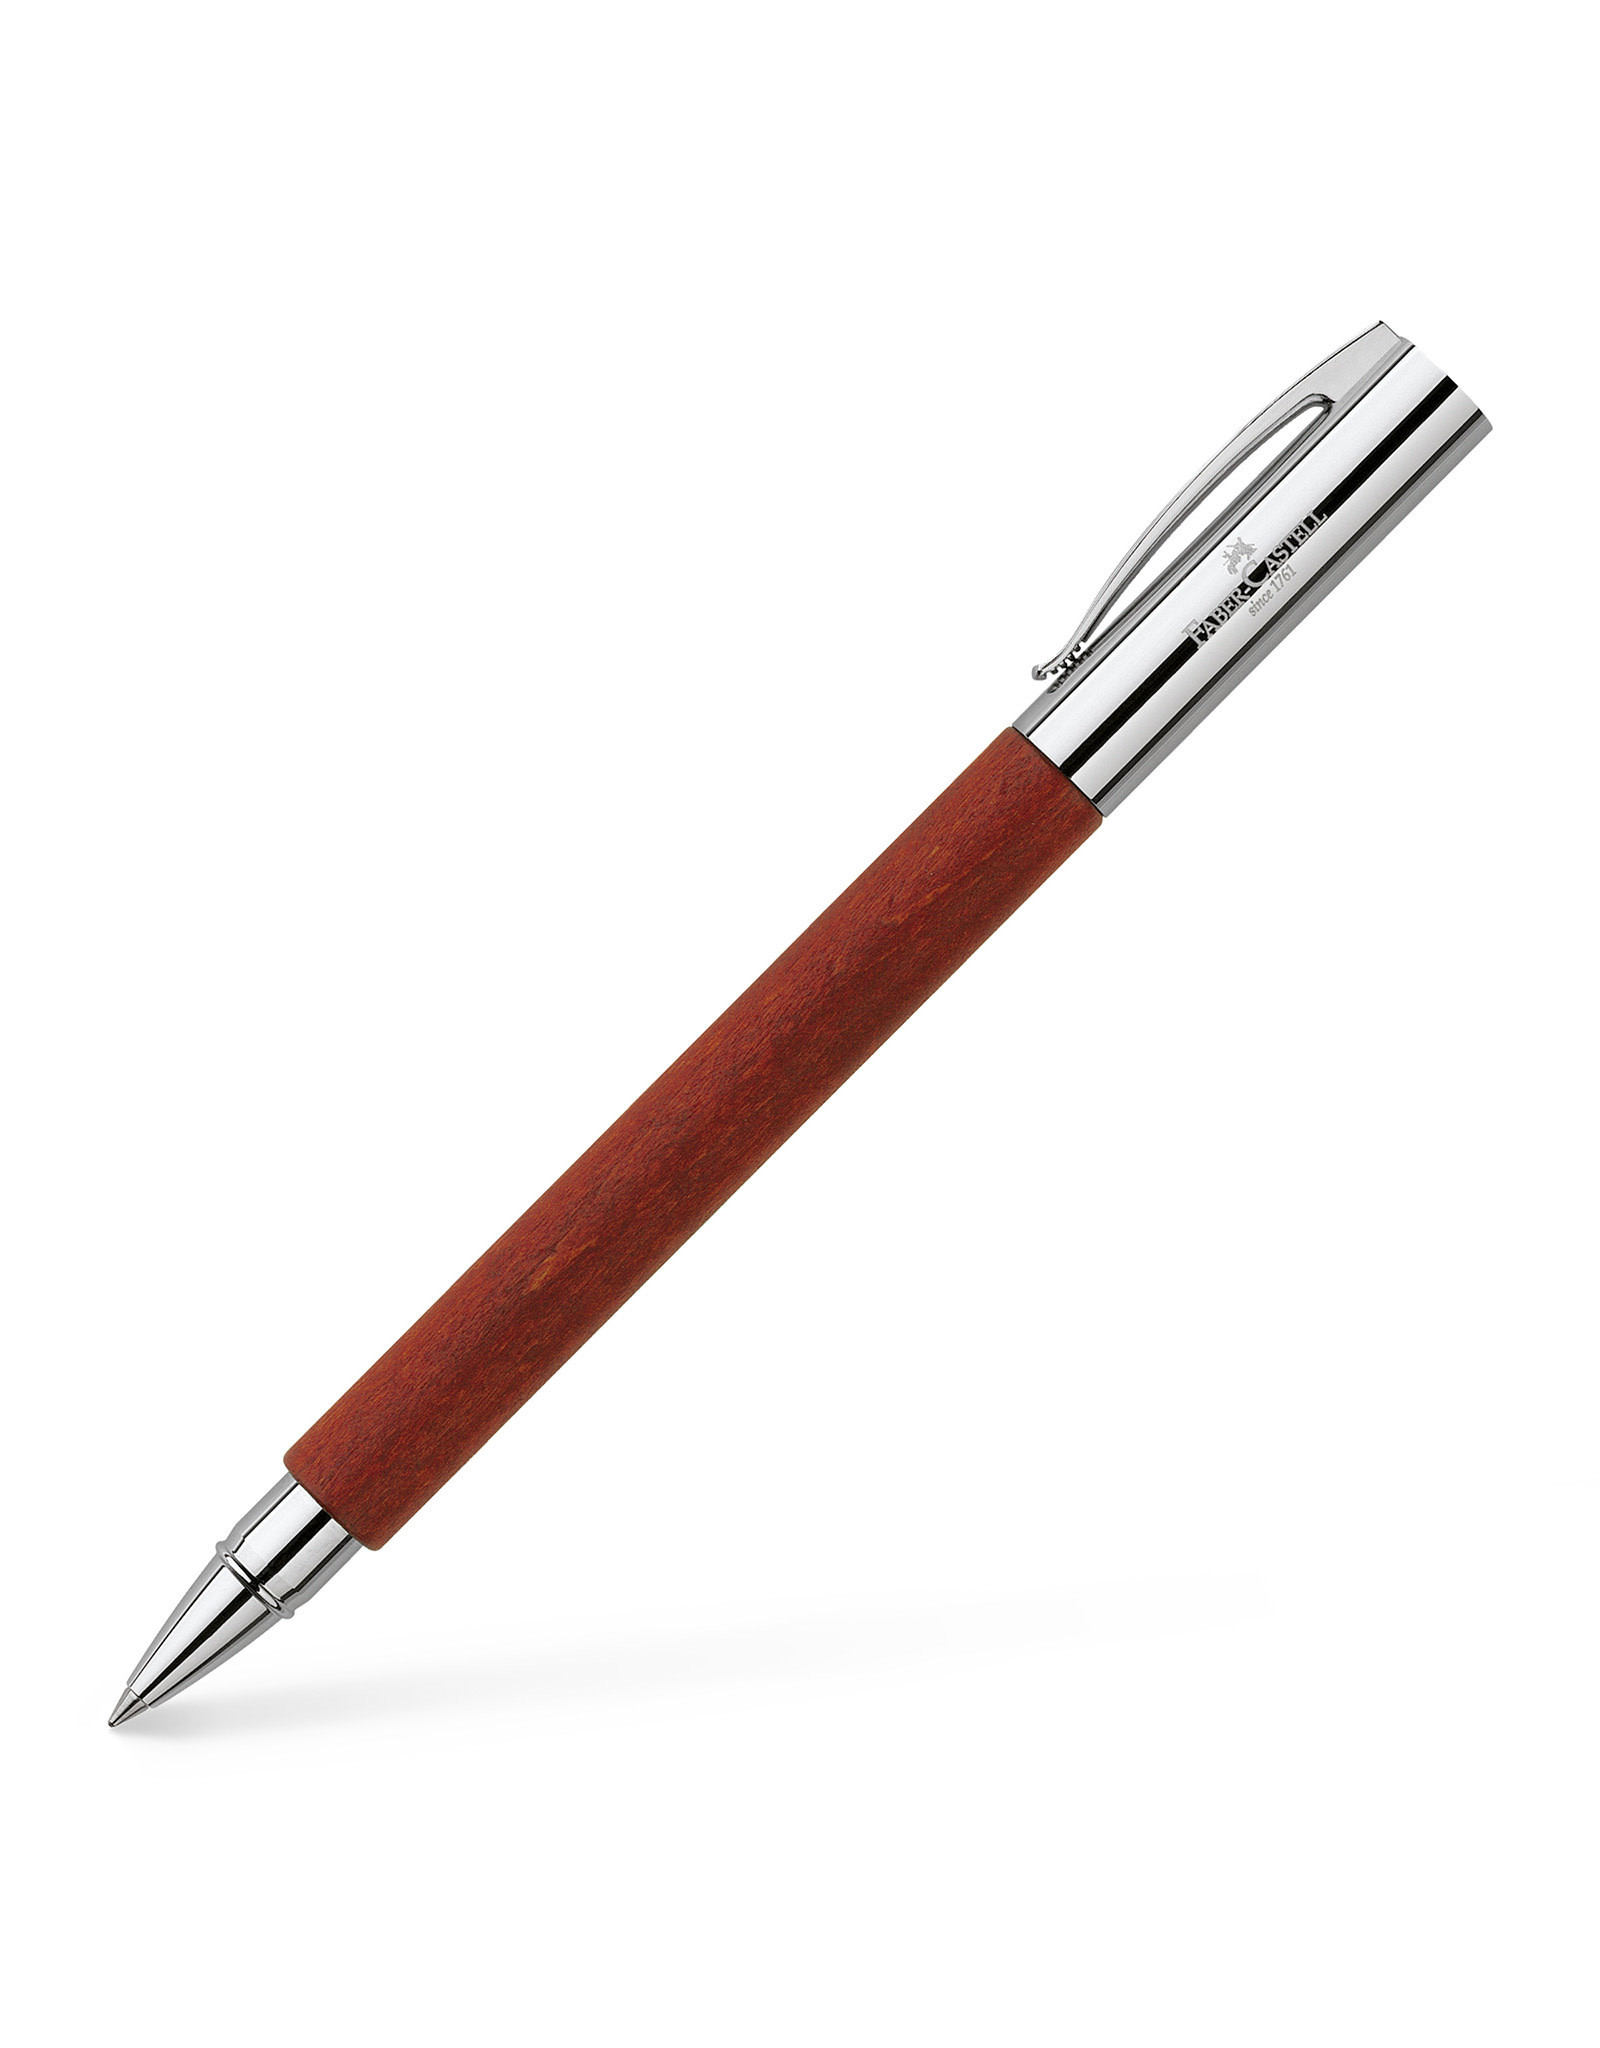 FABER-CASTELL Ambition Rollerball Pen, Pearwood